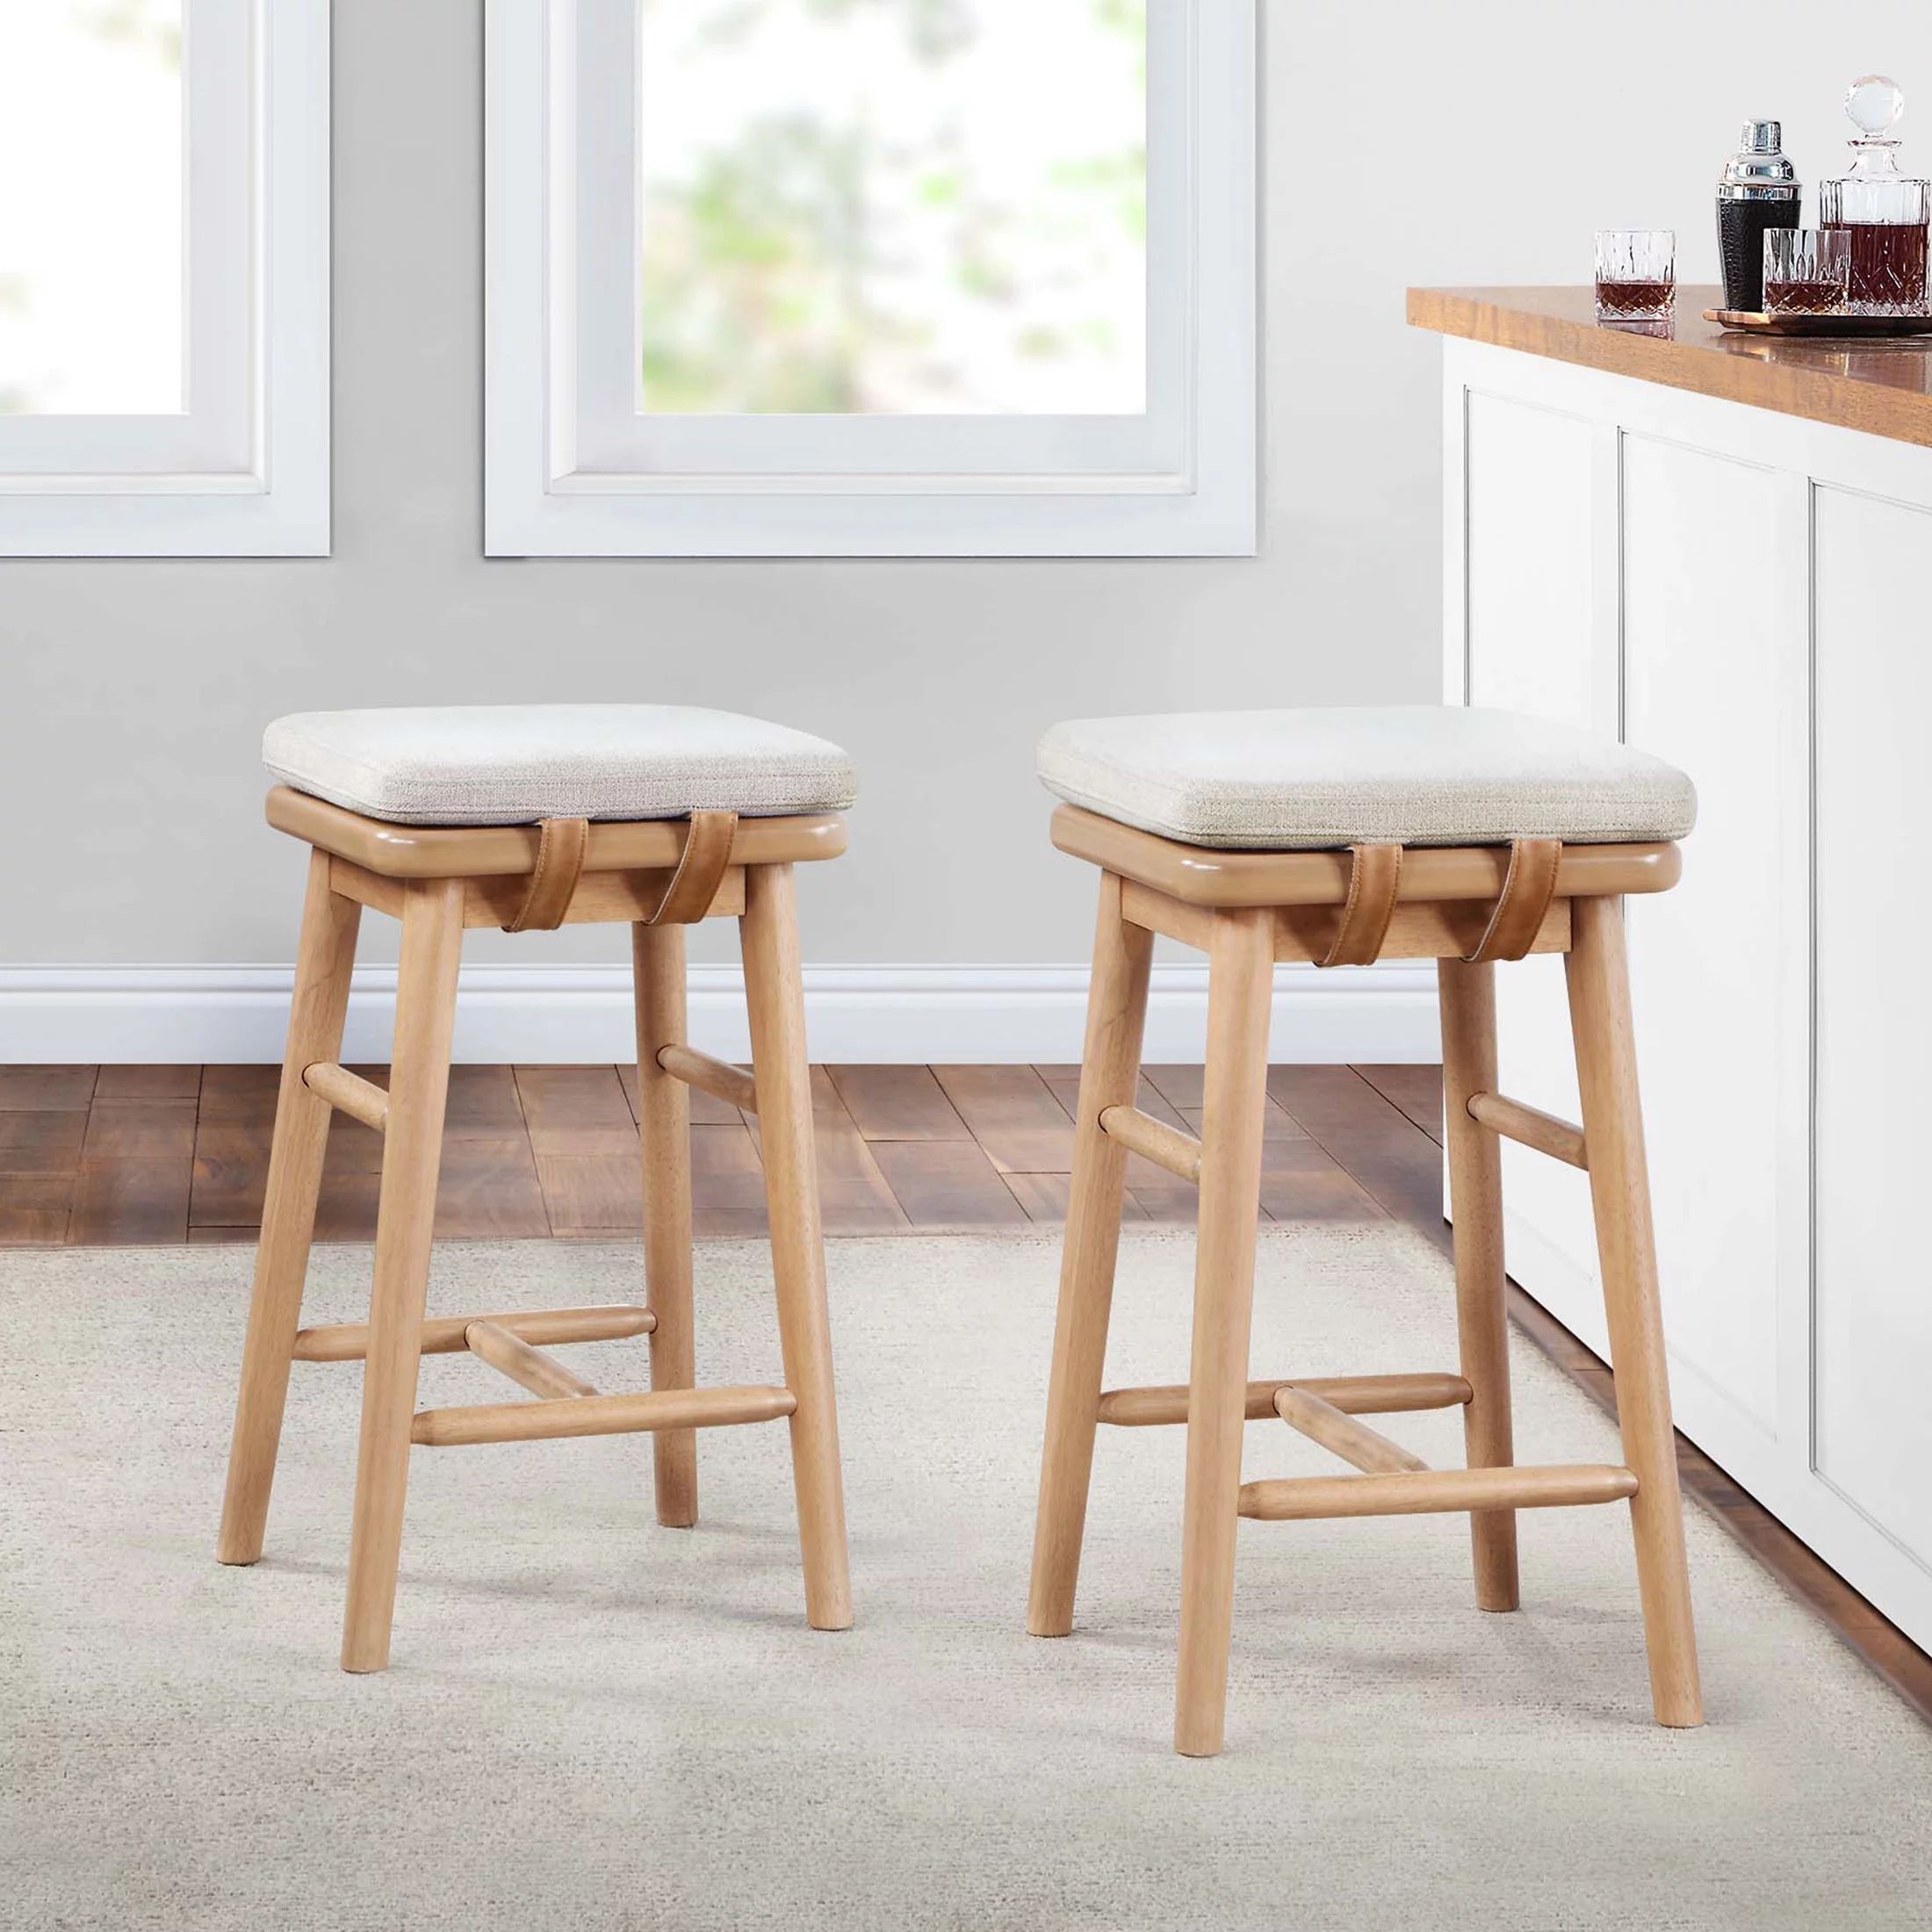 The Better Homes & Gardens Springwood Backless Counter-height Stools, Set of 2, Natural Finish | Walmart (US)